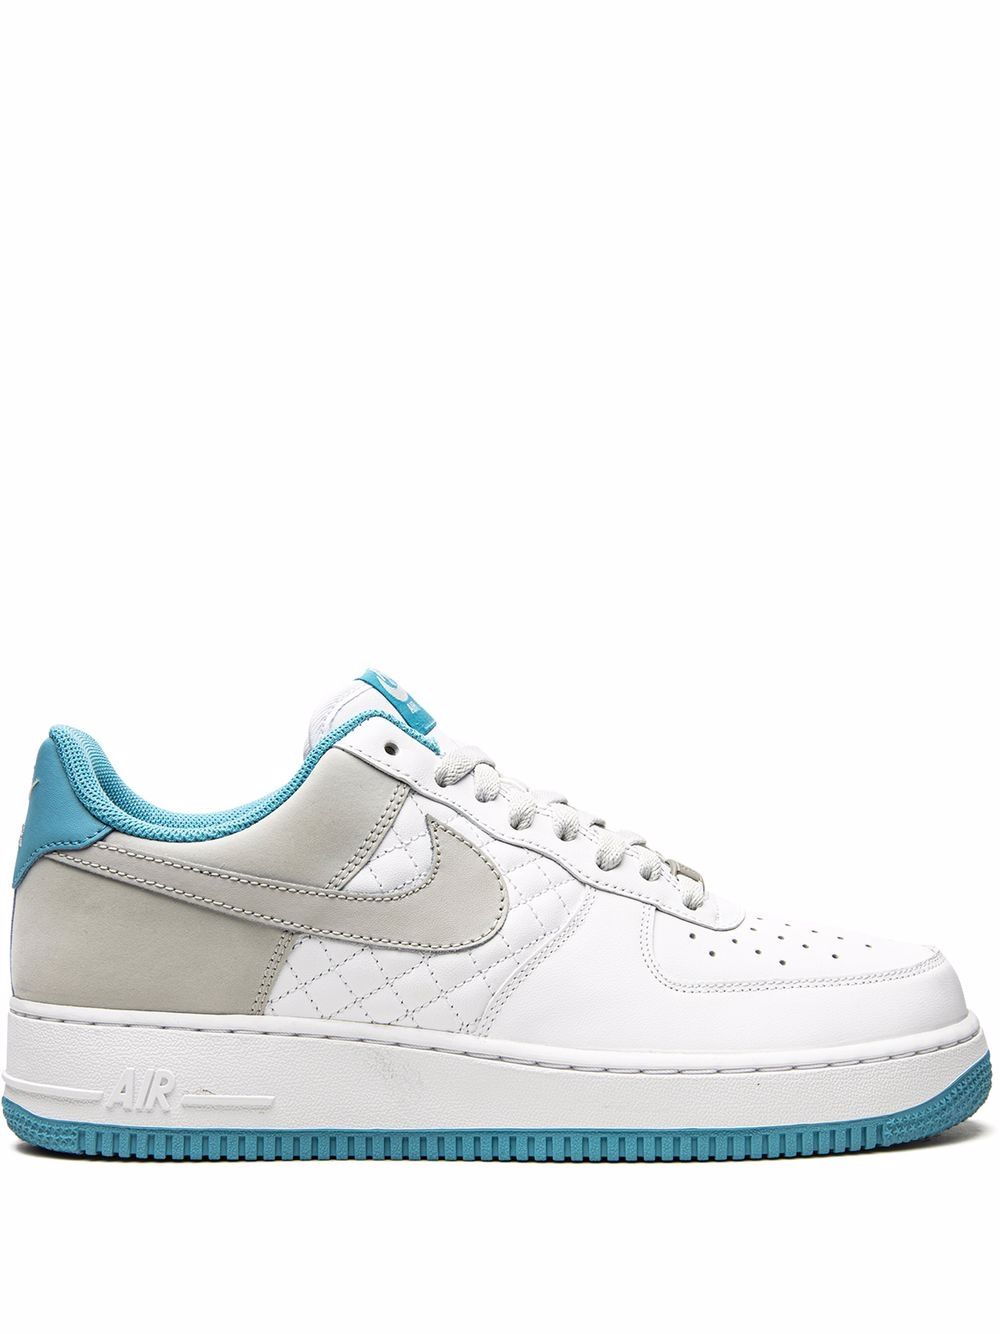 Nike Air Force 1 Low Tint